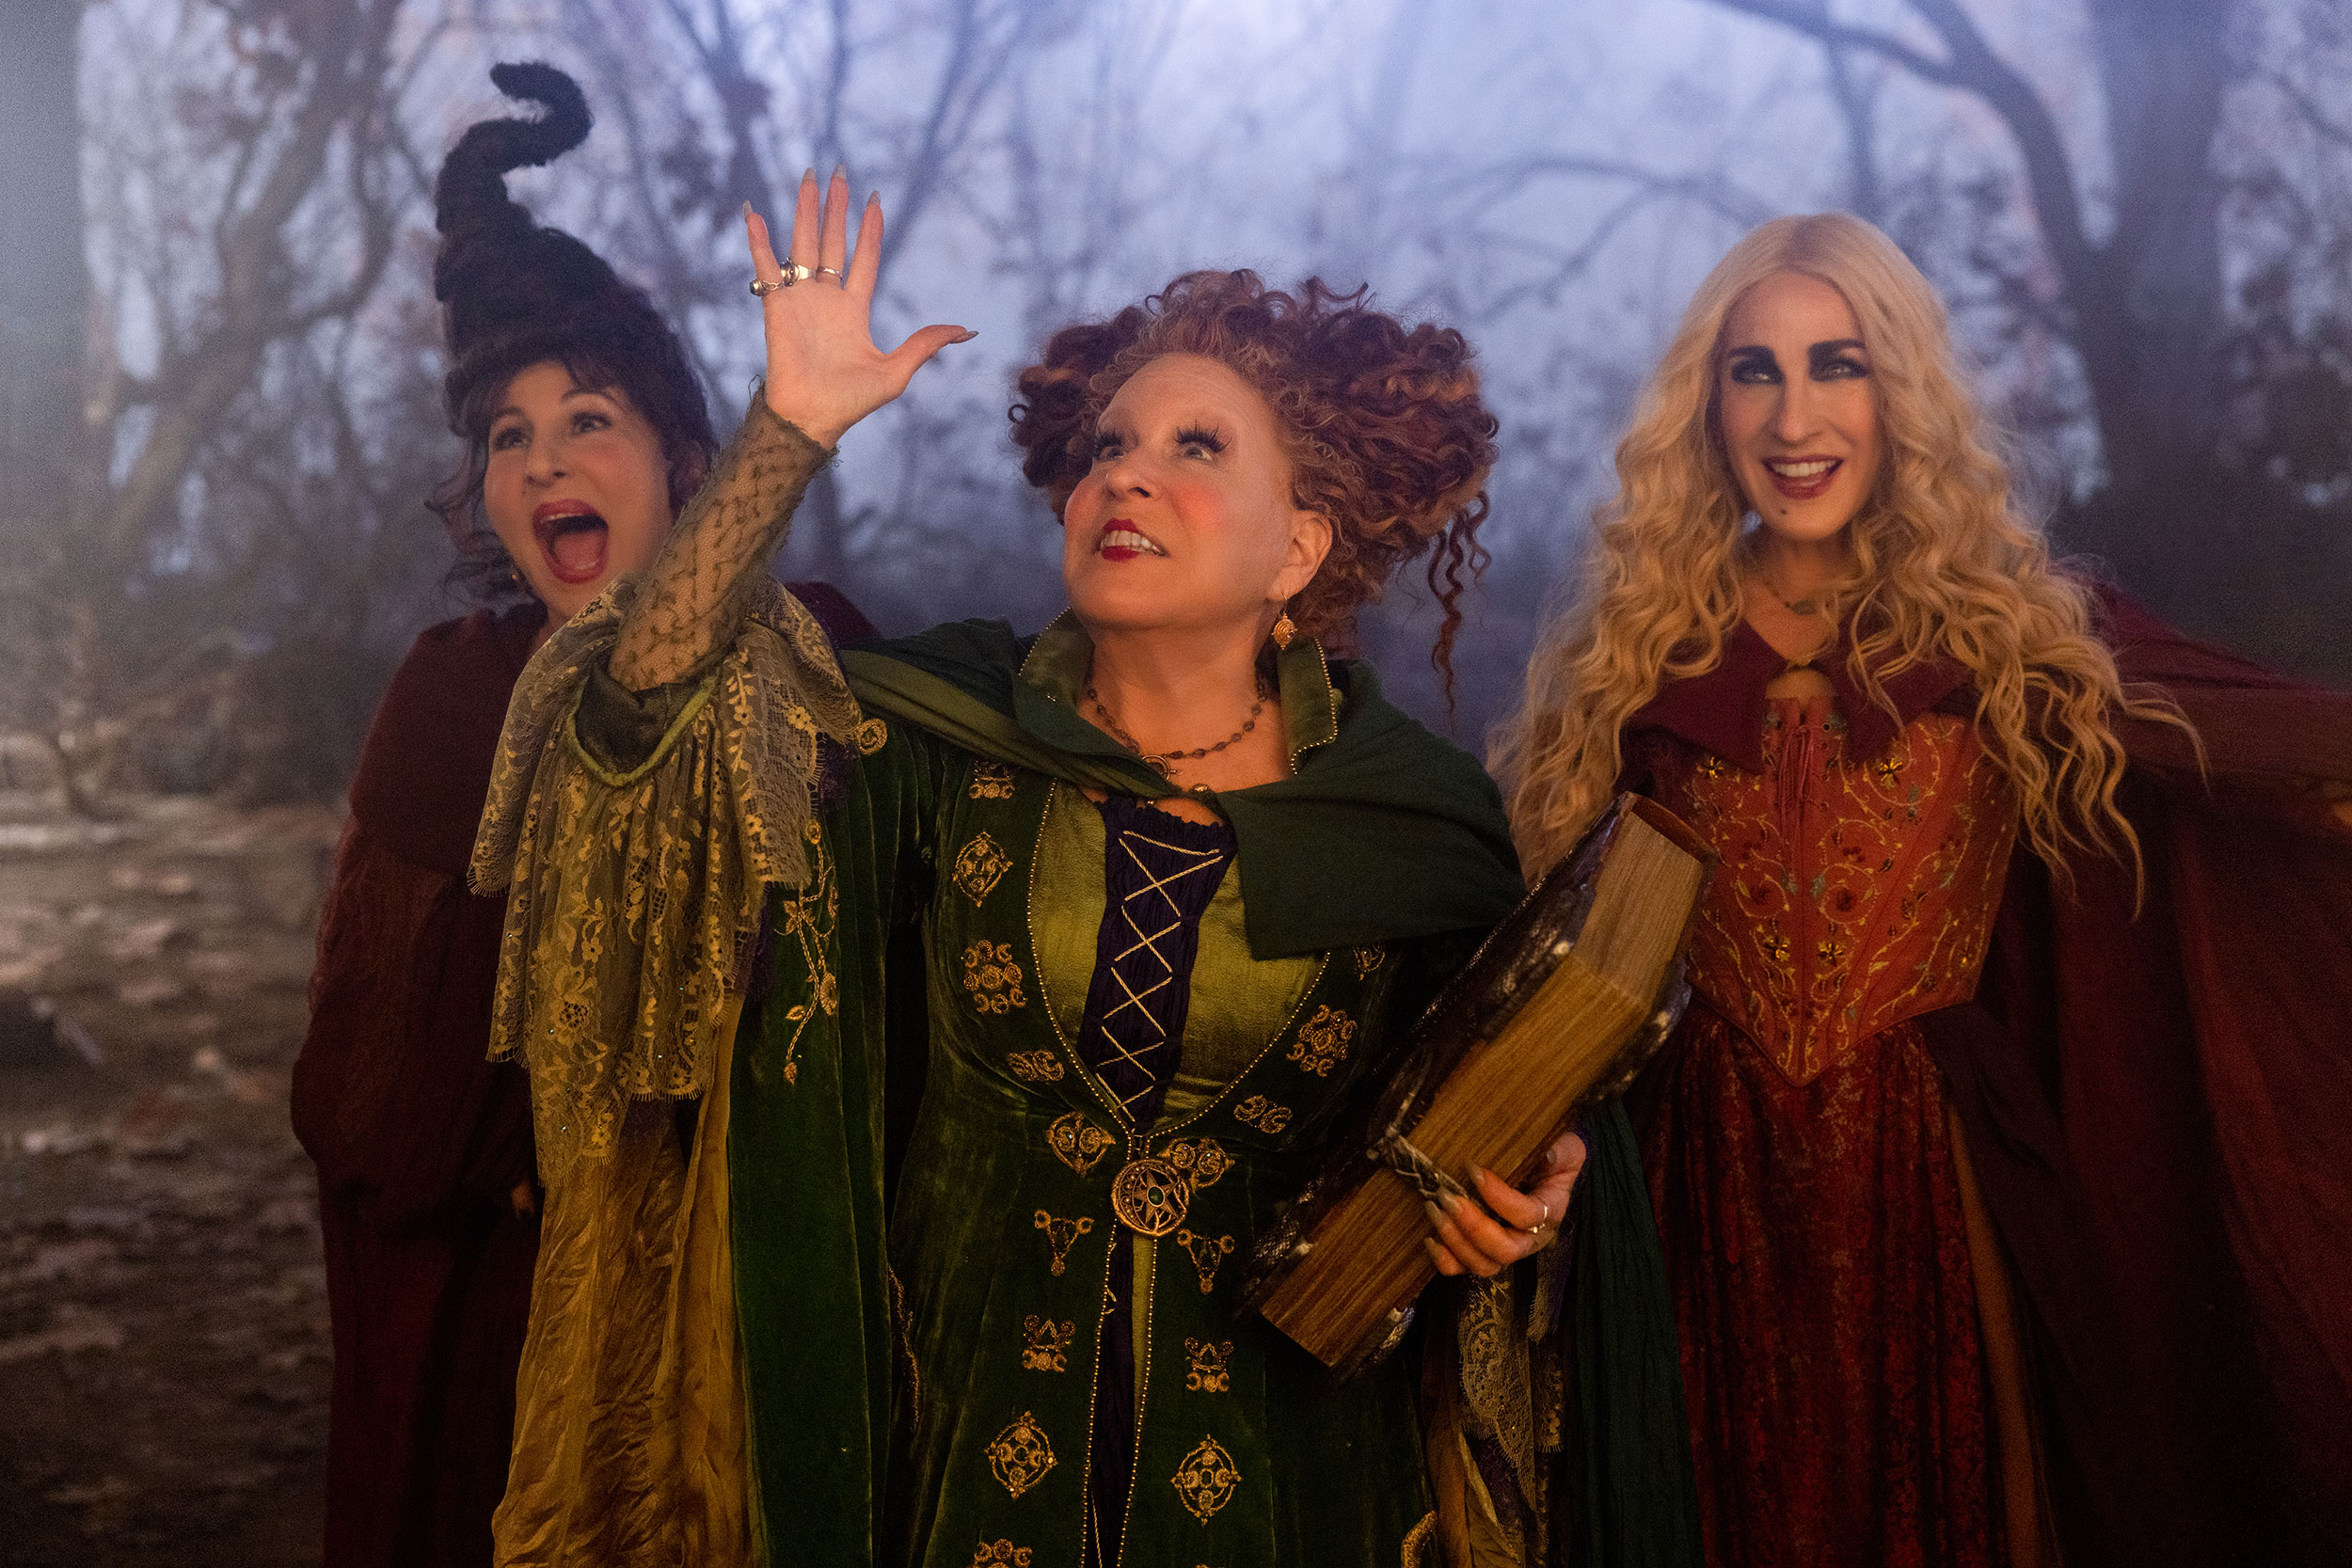 Kathy Najimy as Mary Sanderson, Bette Midler as Winifred Sanderson, and Sarah Jessica Parker as Sar...